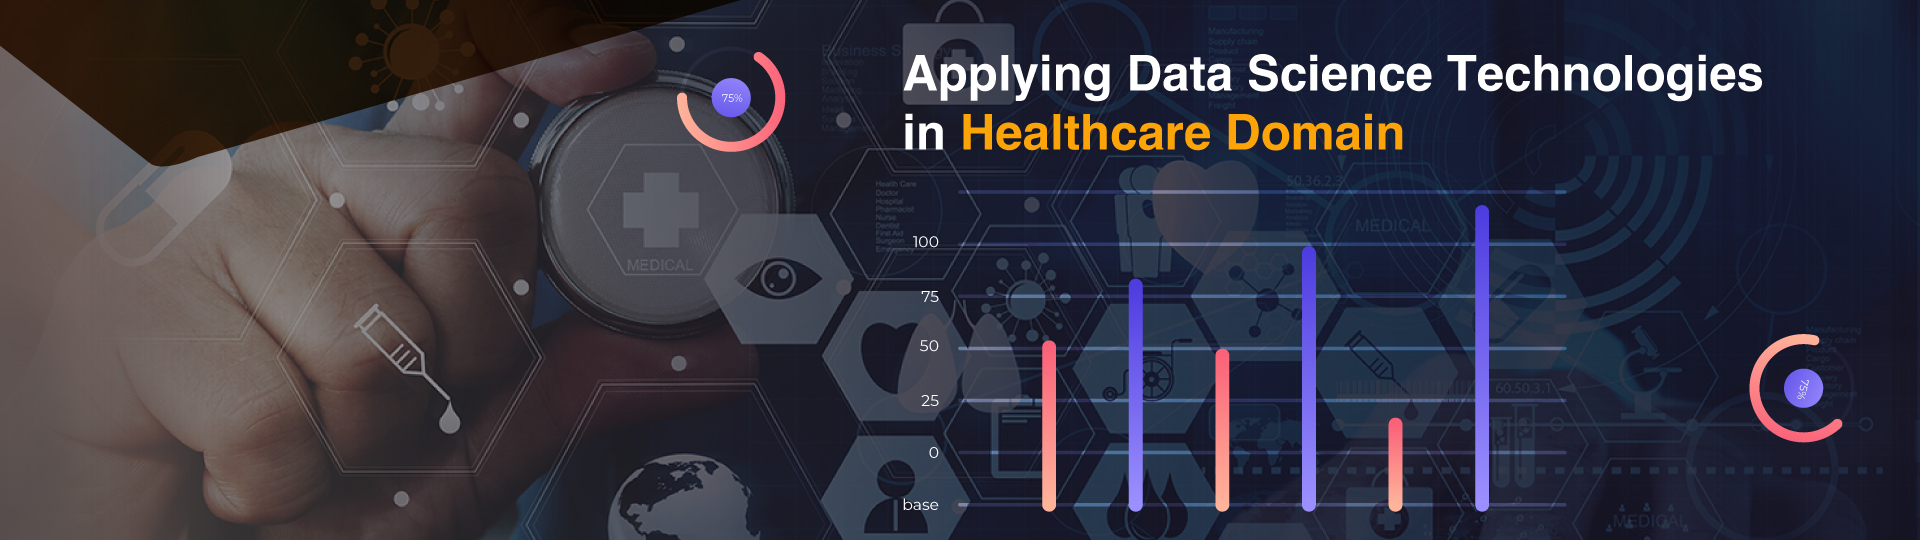 Applying Data Science Technologies in HealthCare